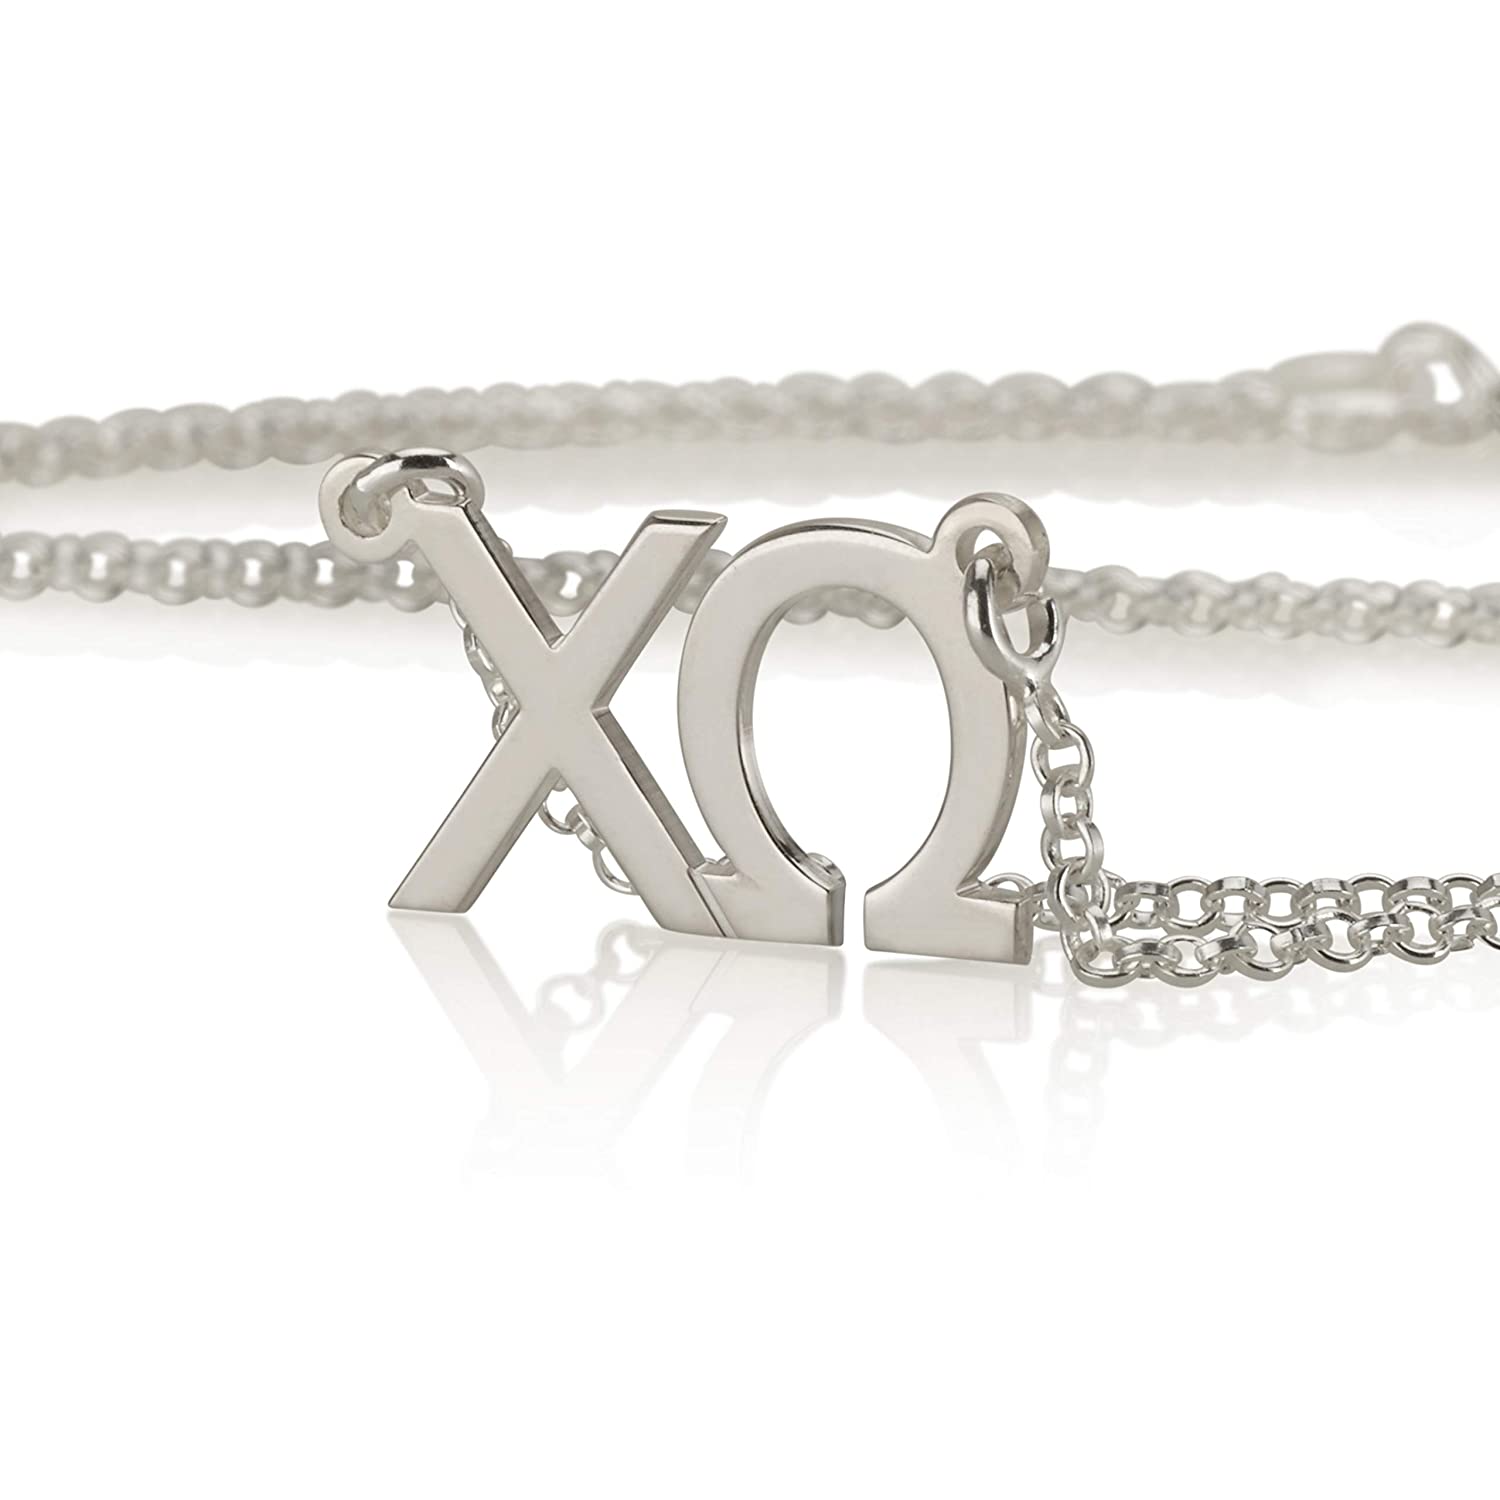 Chi Omega Necklace 925 Sterling Silver, Personalized Sorority Jewelry Gifts